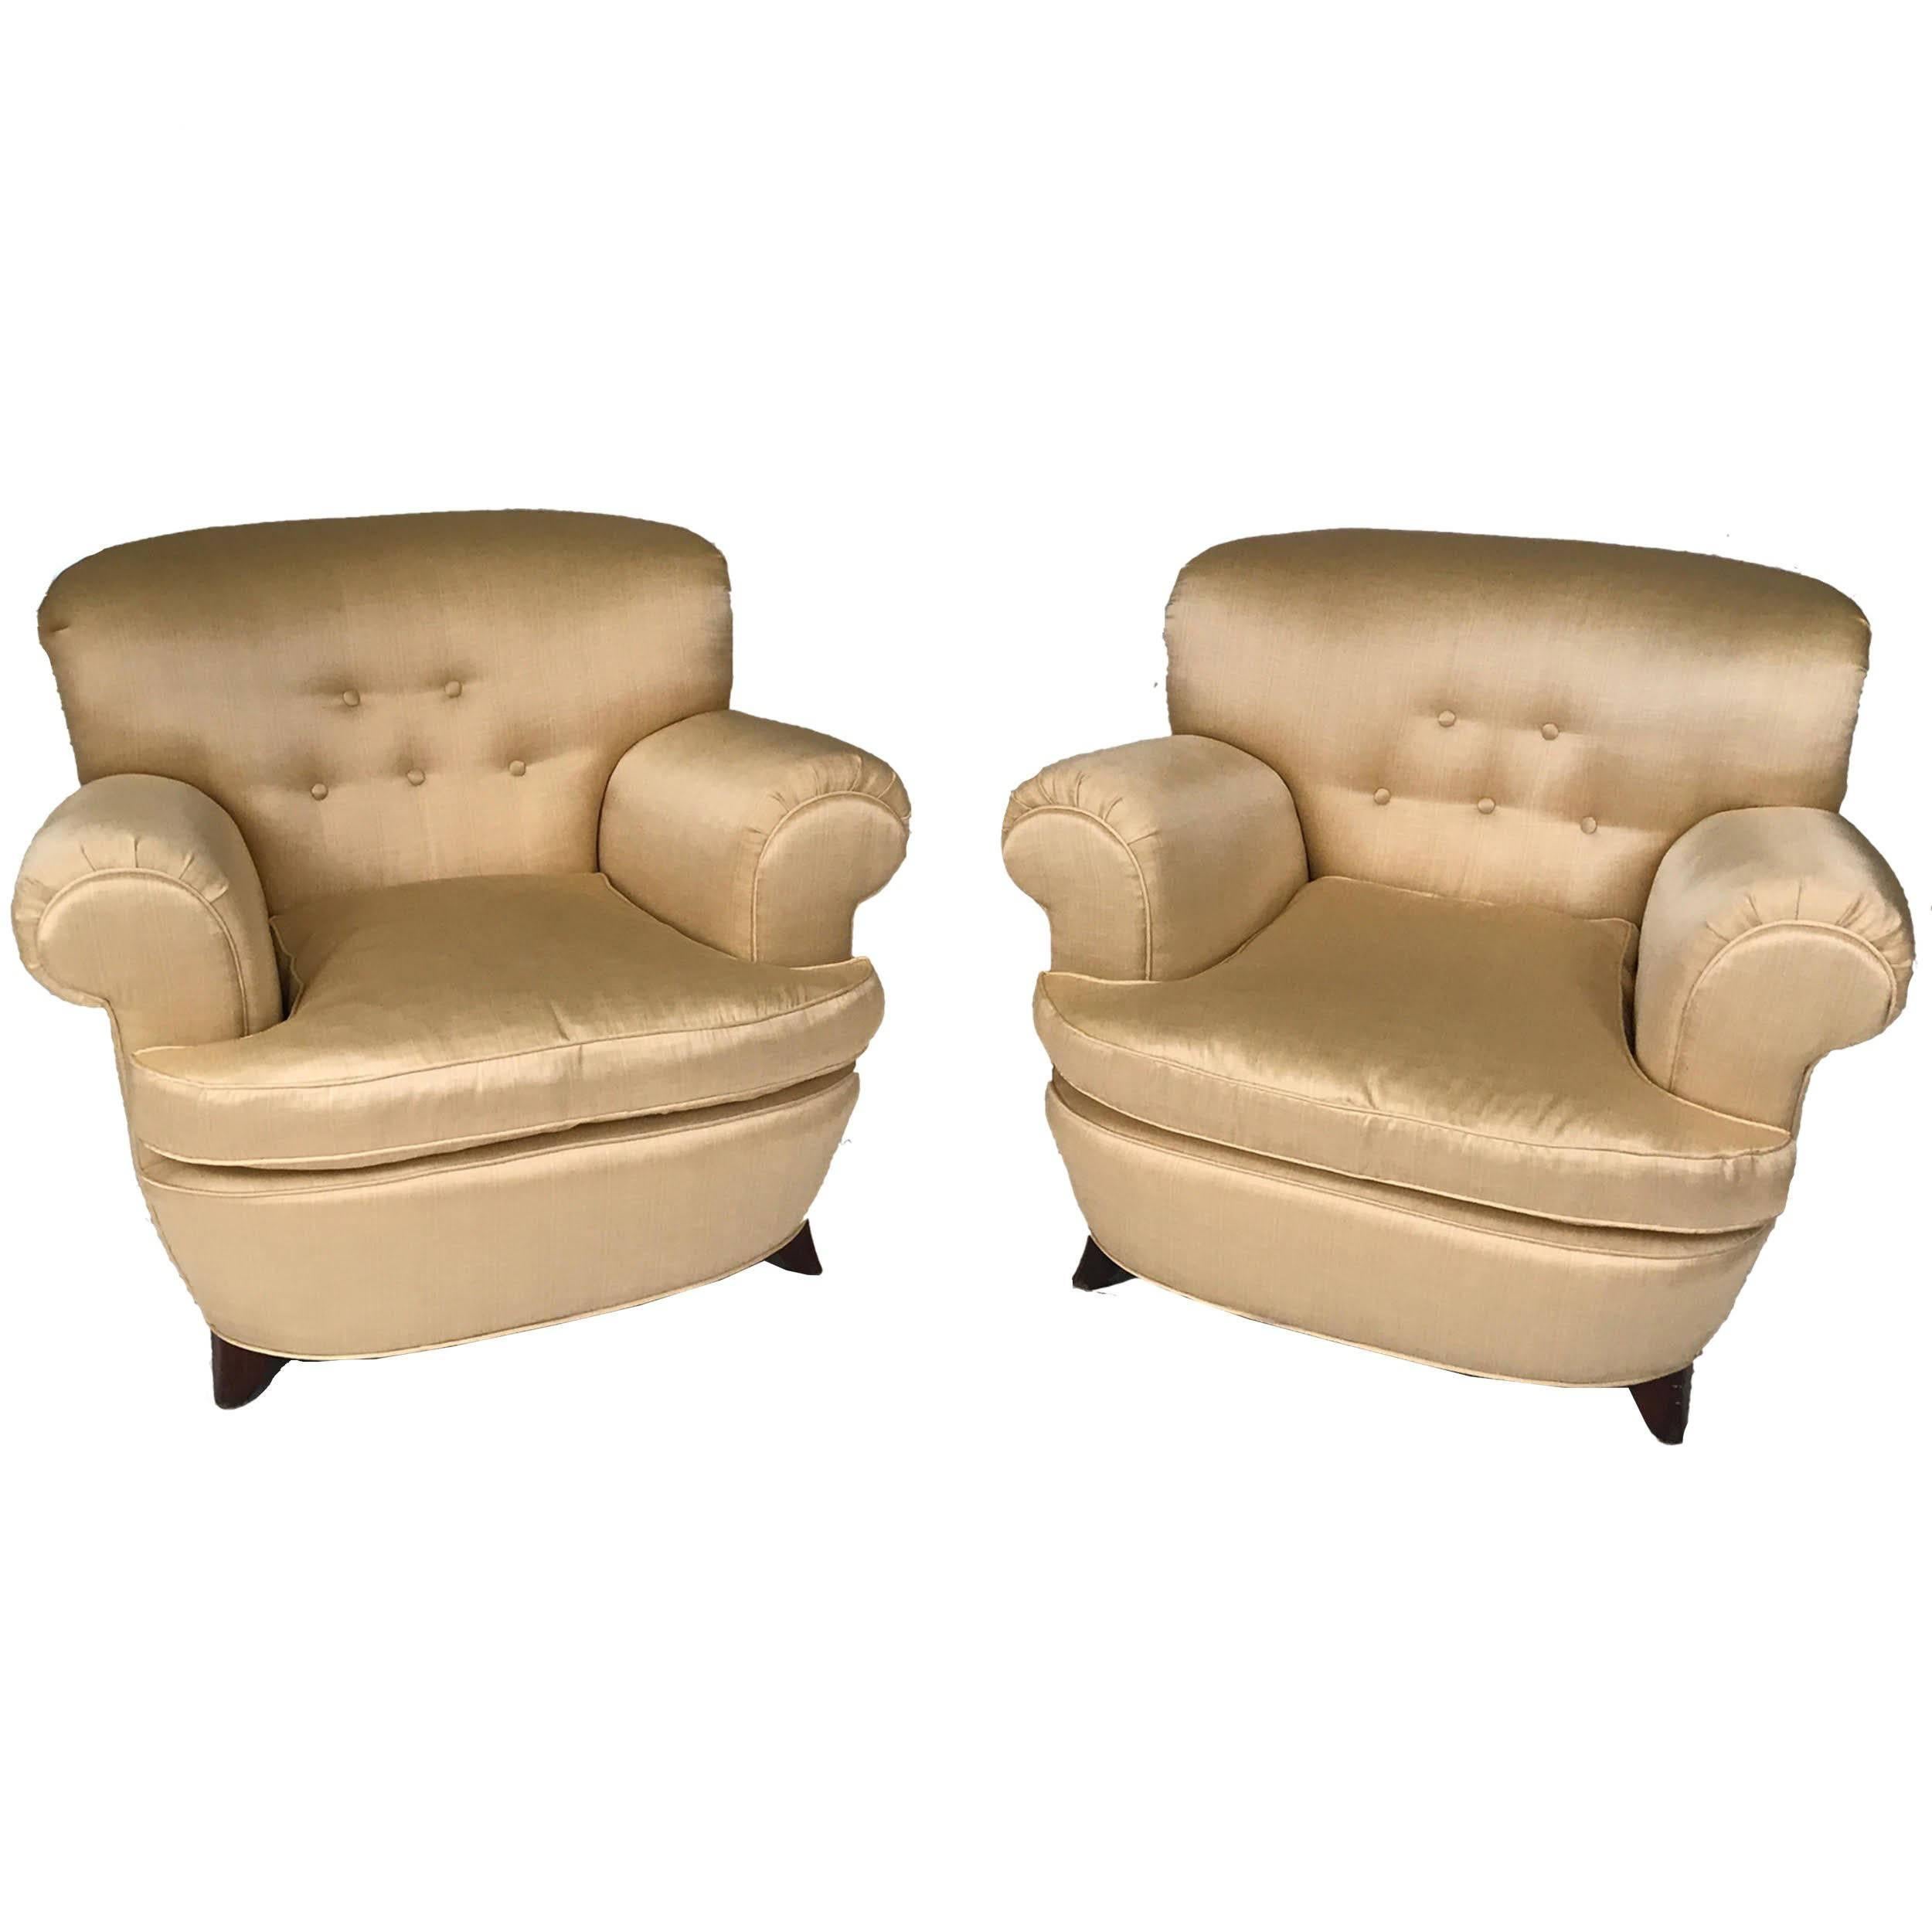 Classic Art Deco Club Chairs For Sale